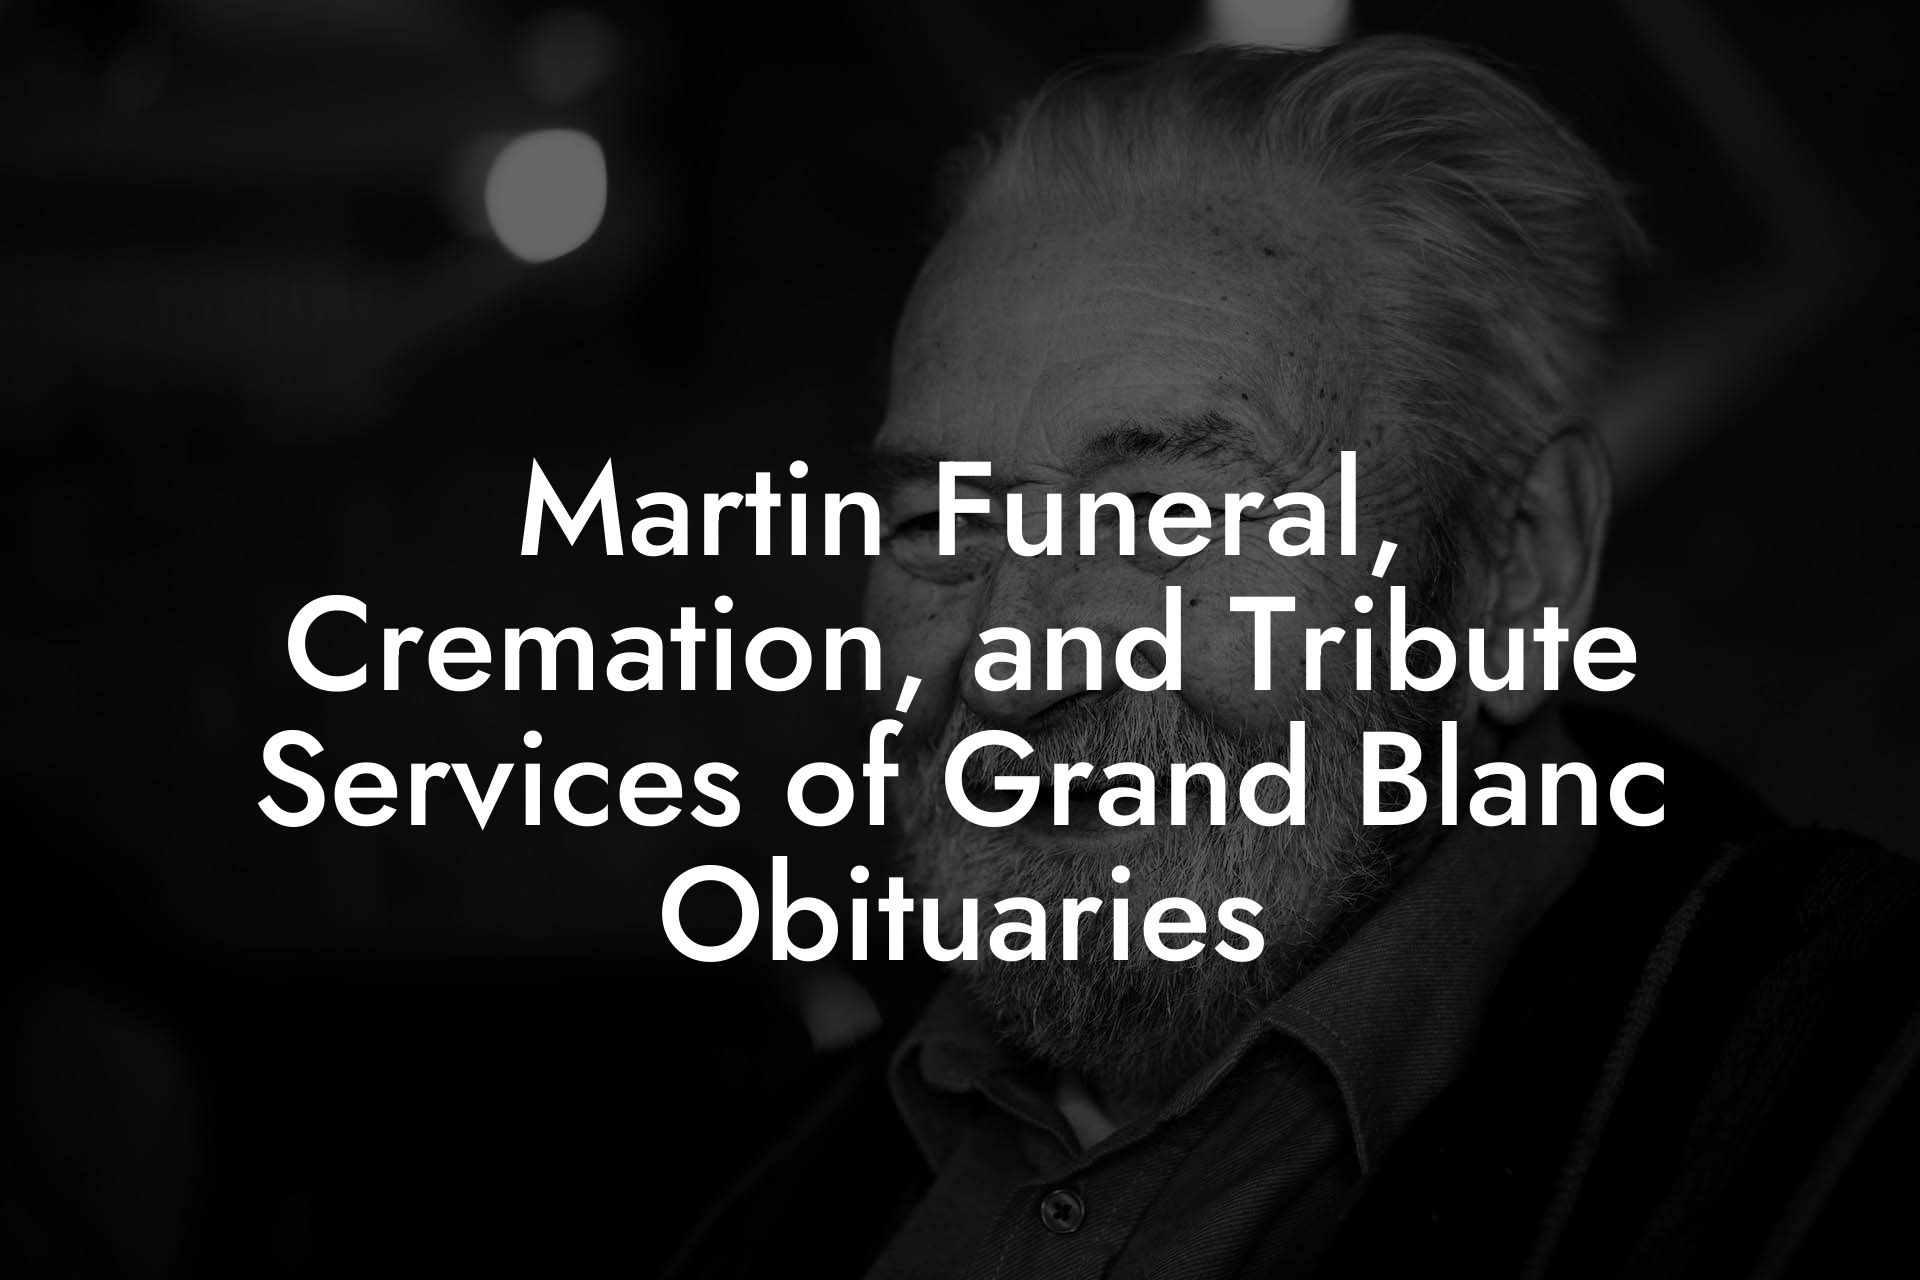 Martin Funeral, Cremation, and Tribute Services of Grand Blanc Obituaries